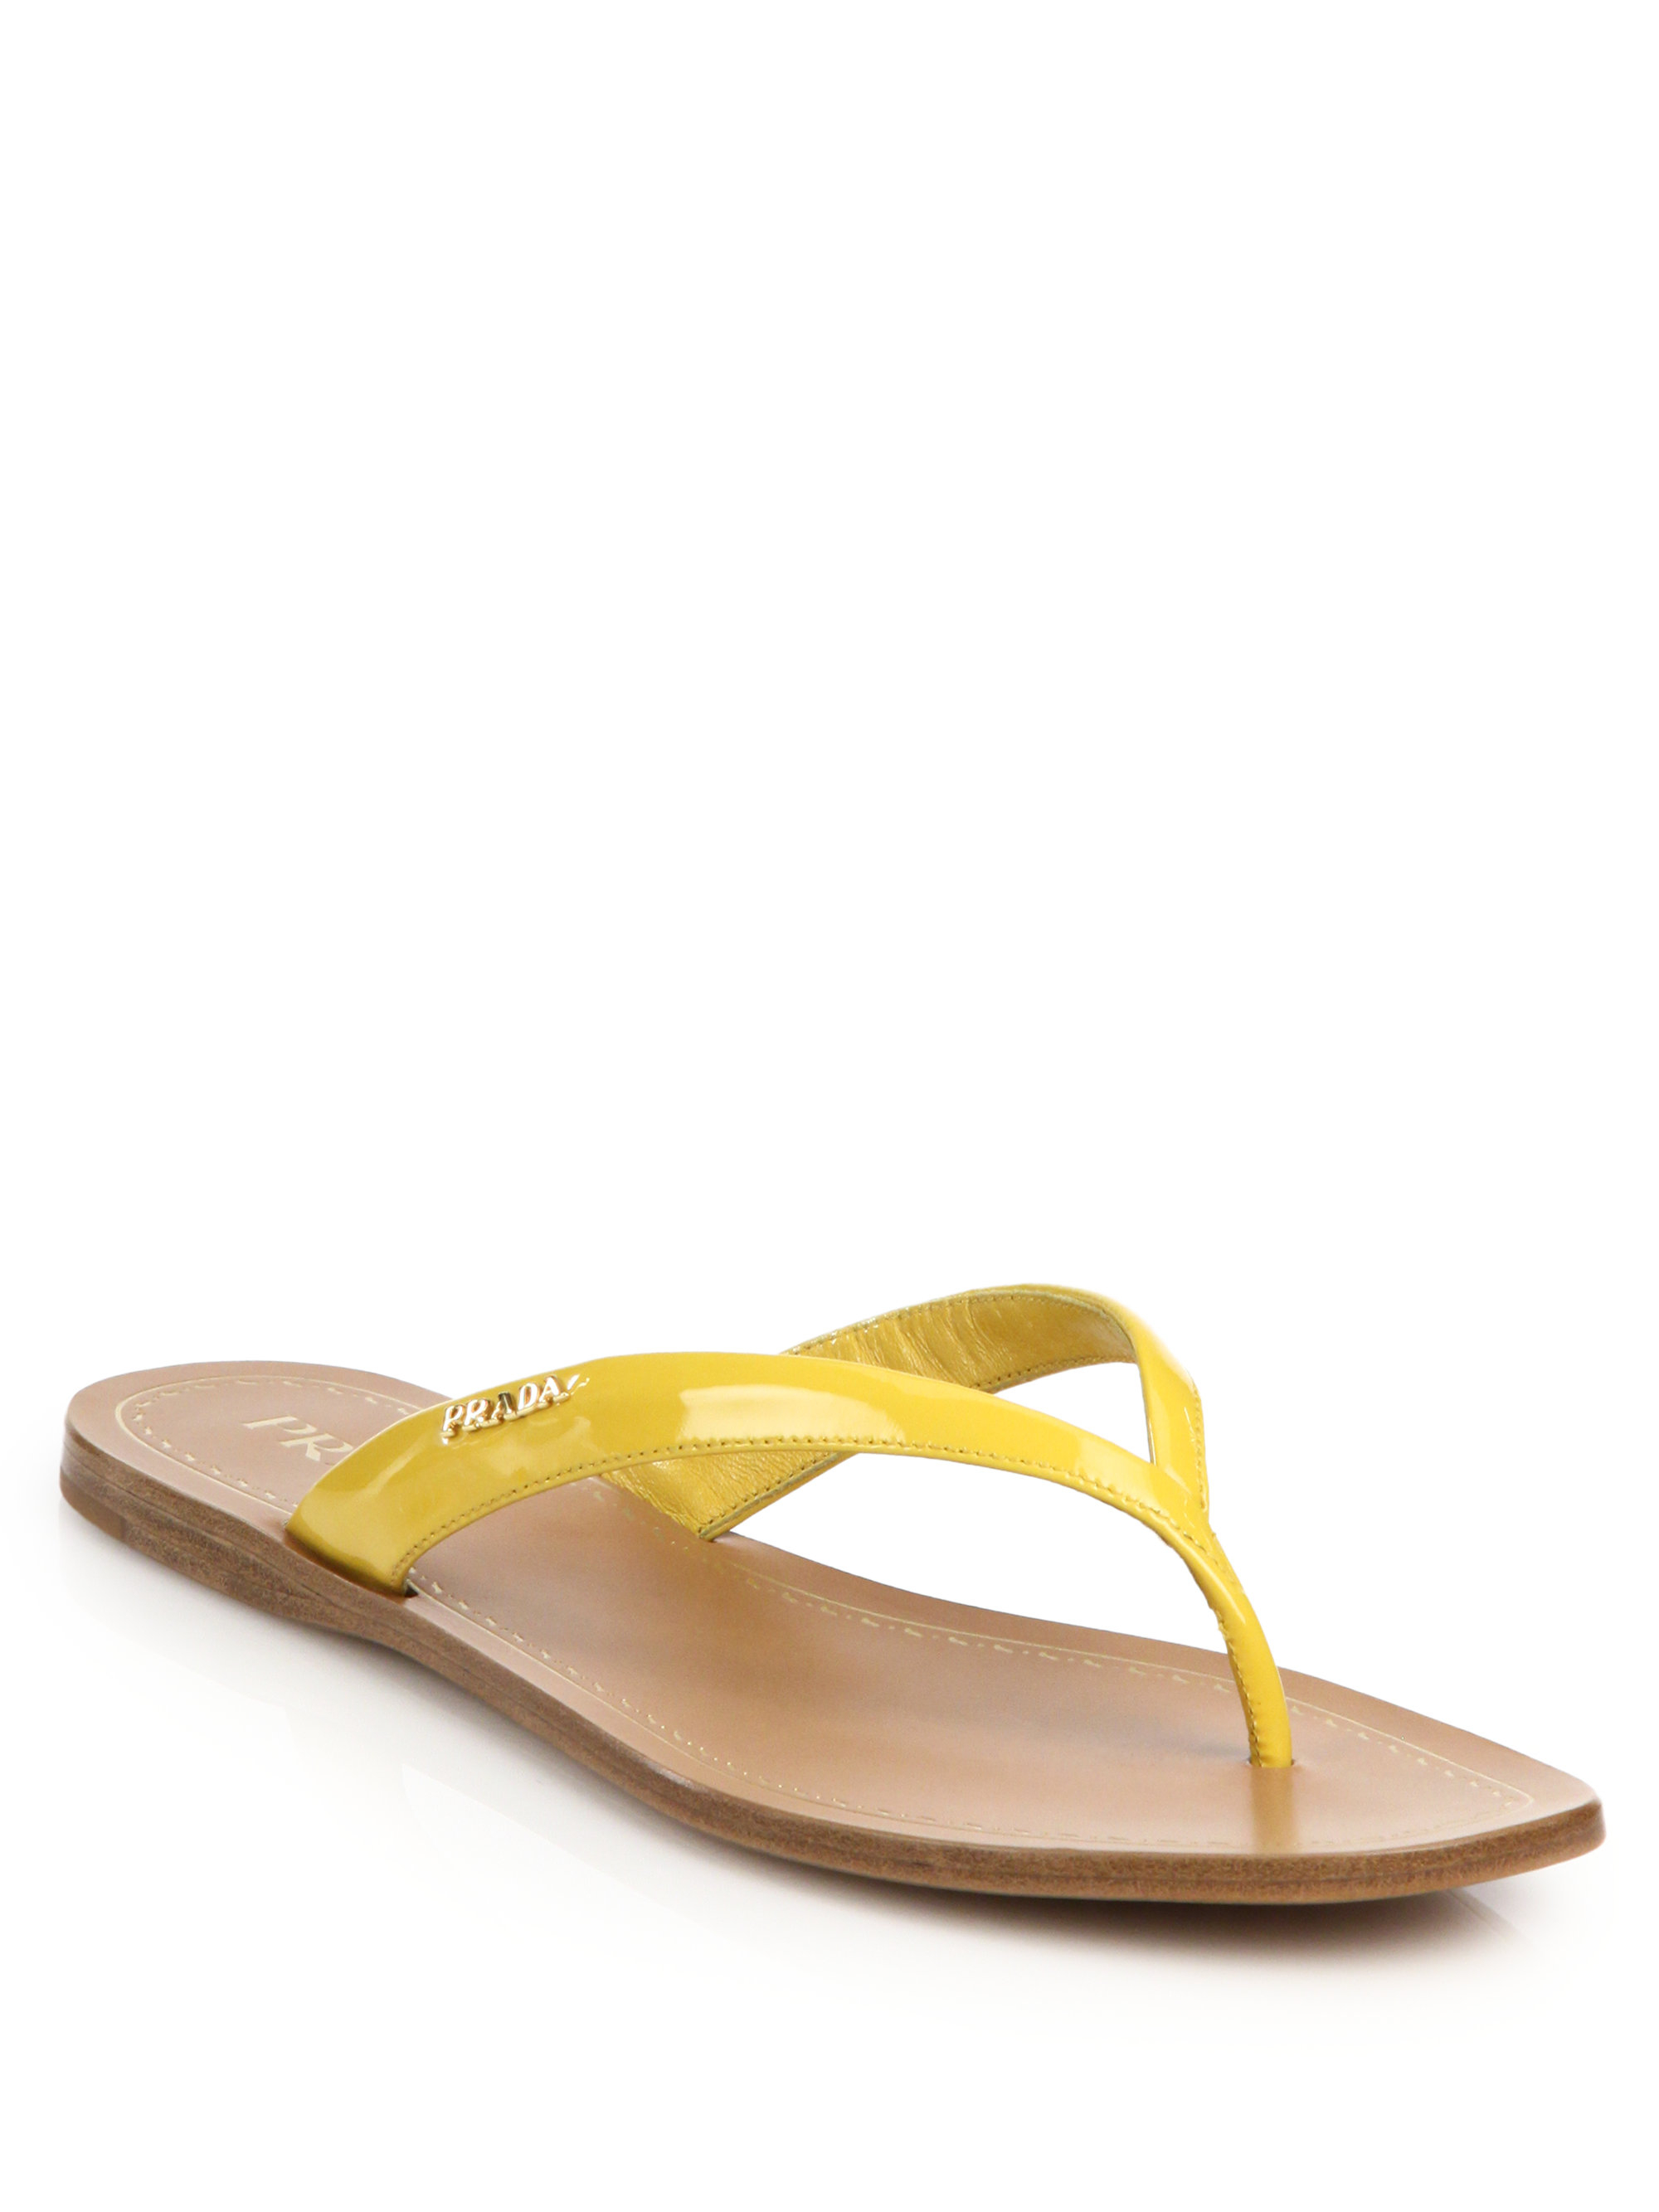 Lyst - Prada Patent Leather Thong Sandals in Yellow